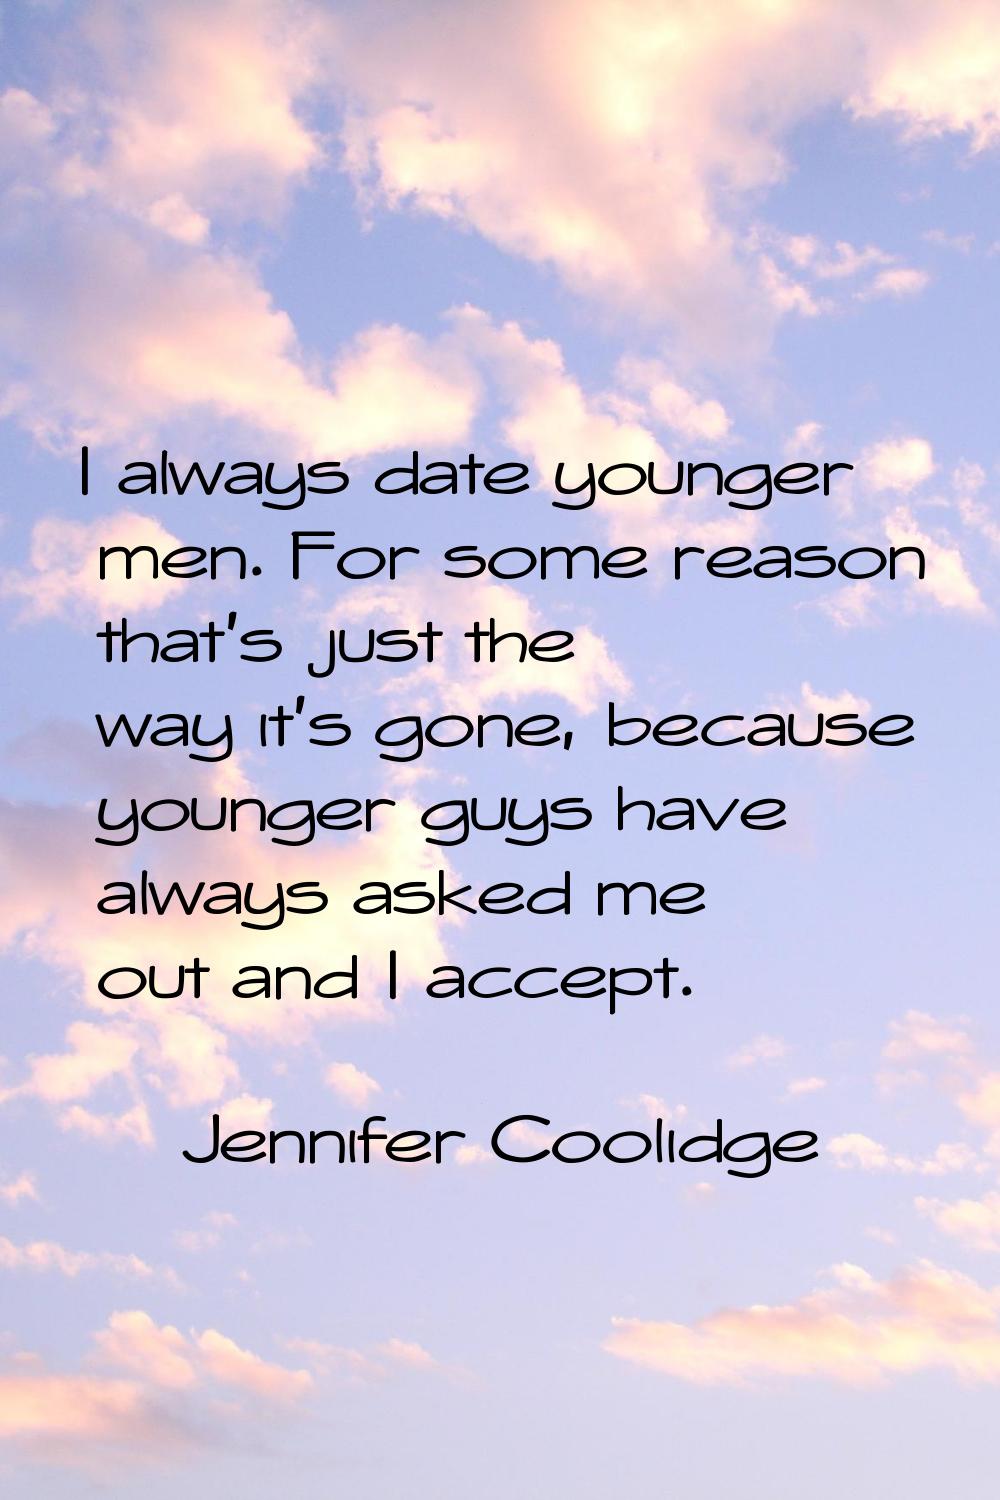 I always date younger men. For some reason that's just the way it's gone, because younger guys have